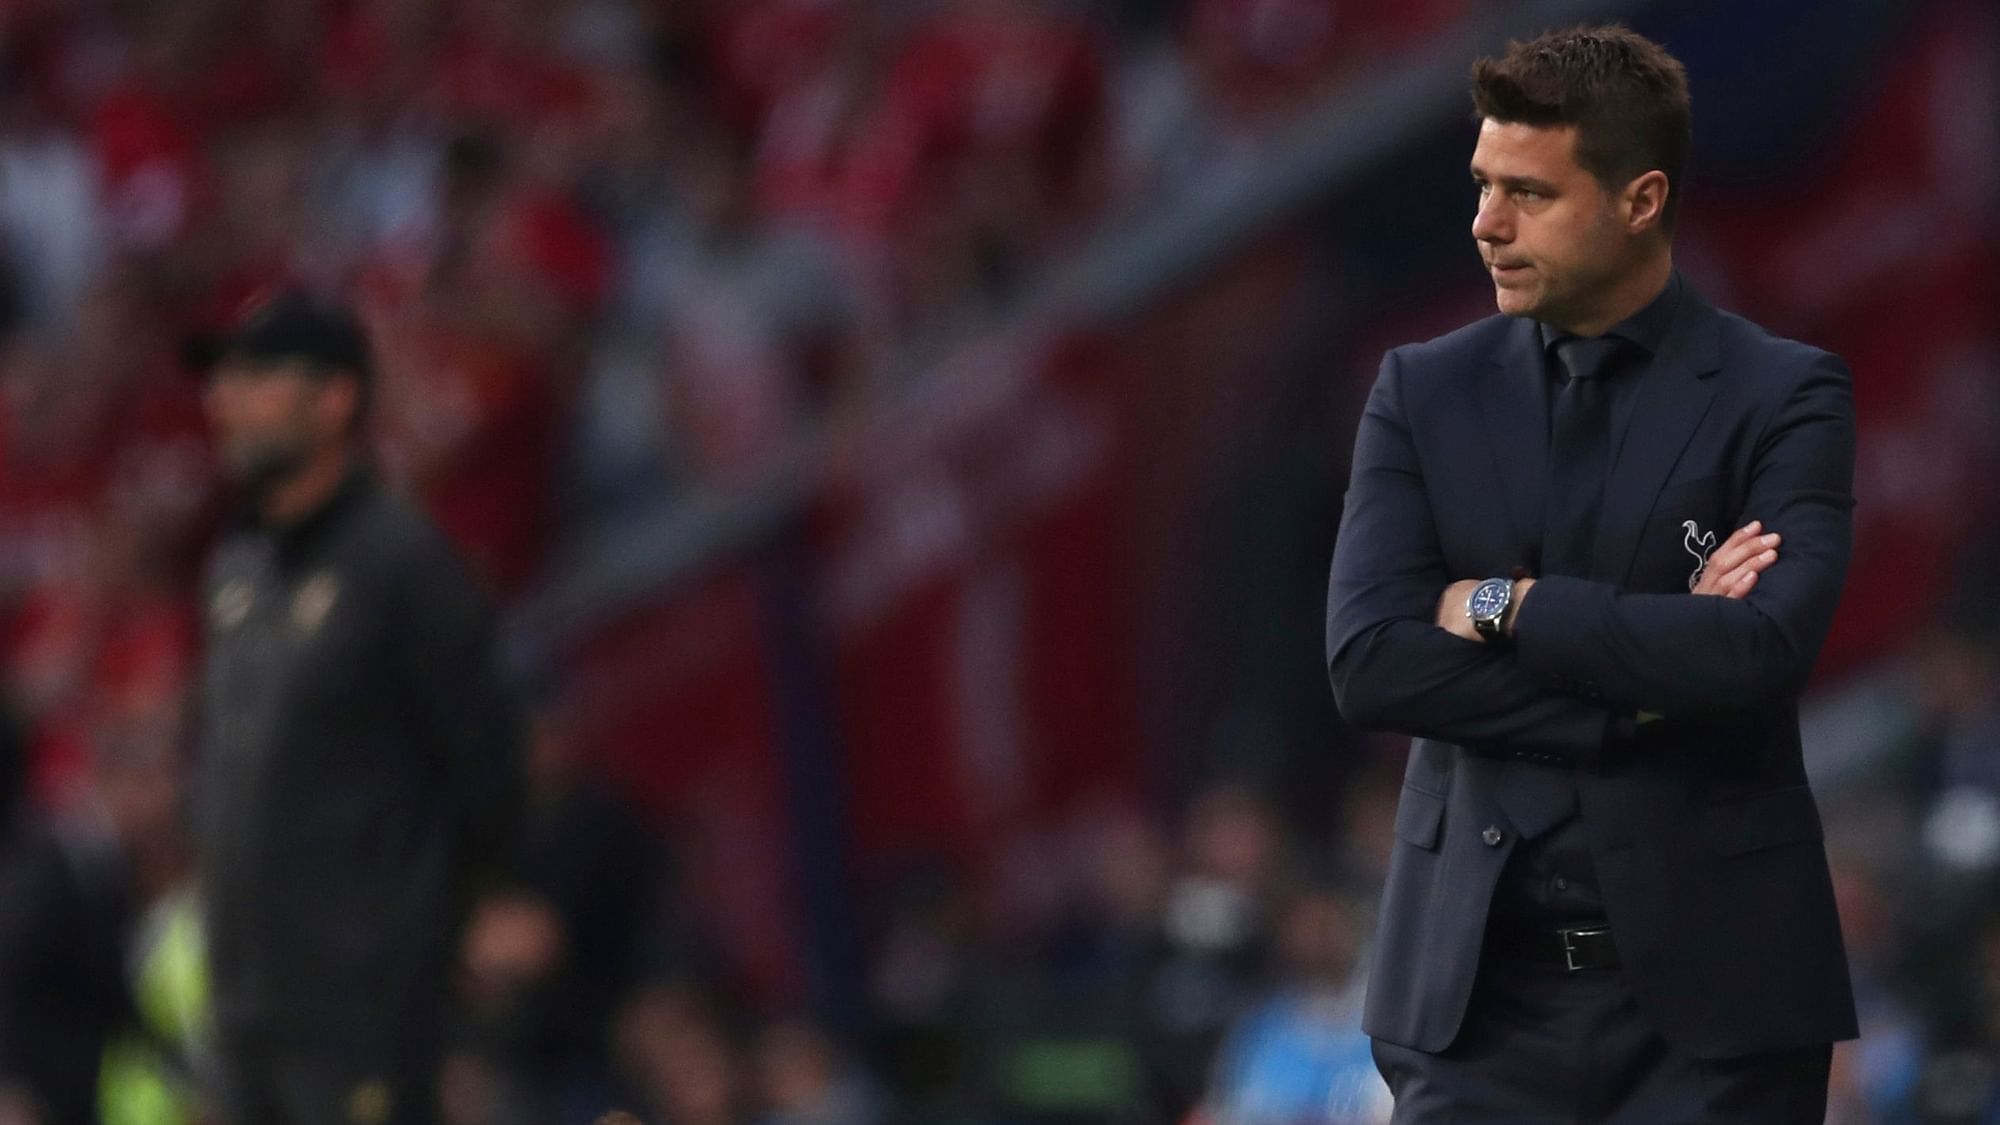 Mauricio Pochettino may continue to be praised for his managerial style, but not yet for his titles.